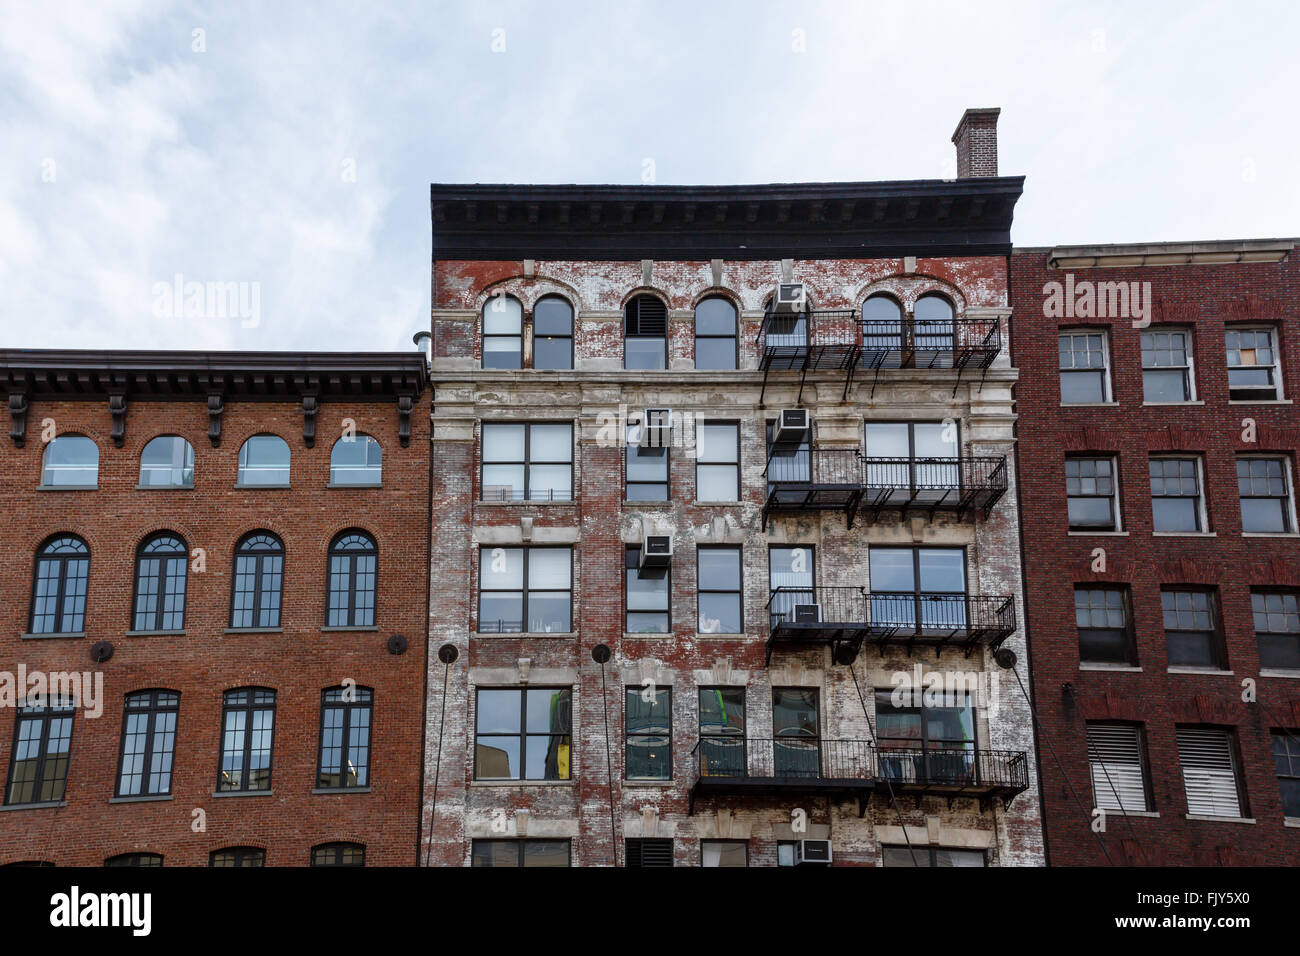 Pattern of fire escapes and window air conditioning units  on side of older brick building in New York City with blue sky above Stock Photo